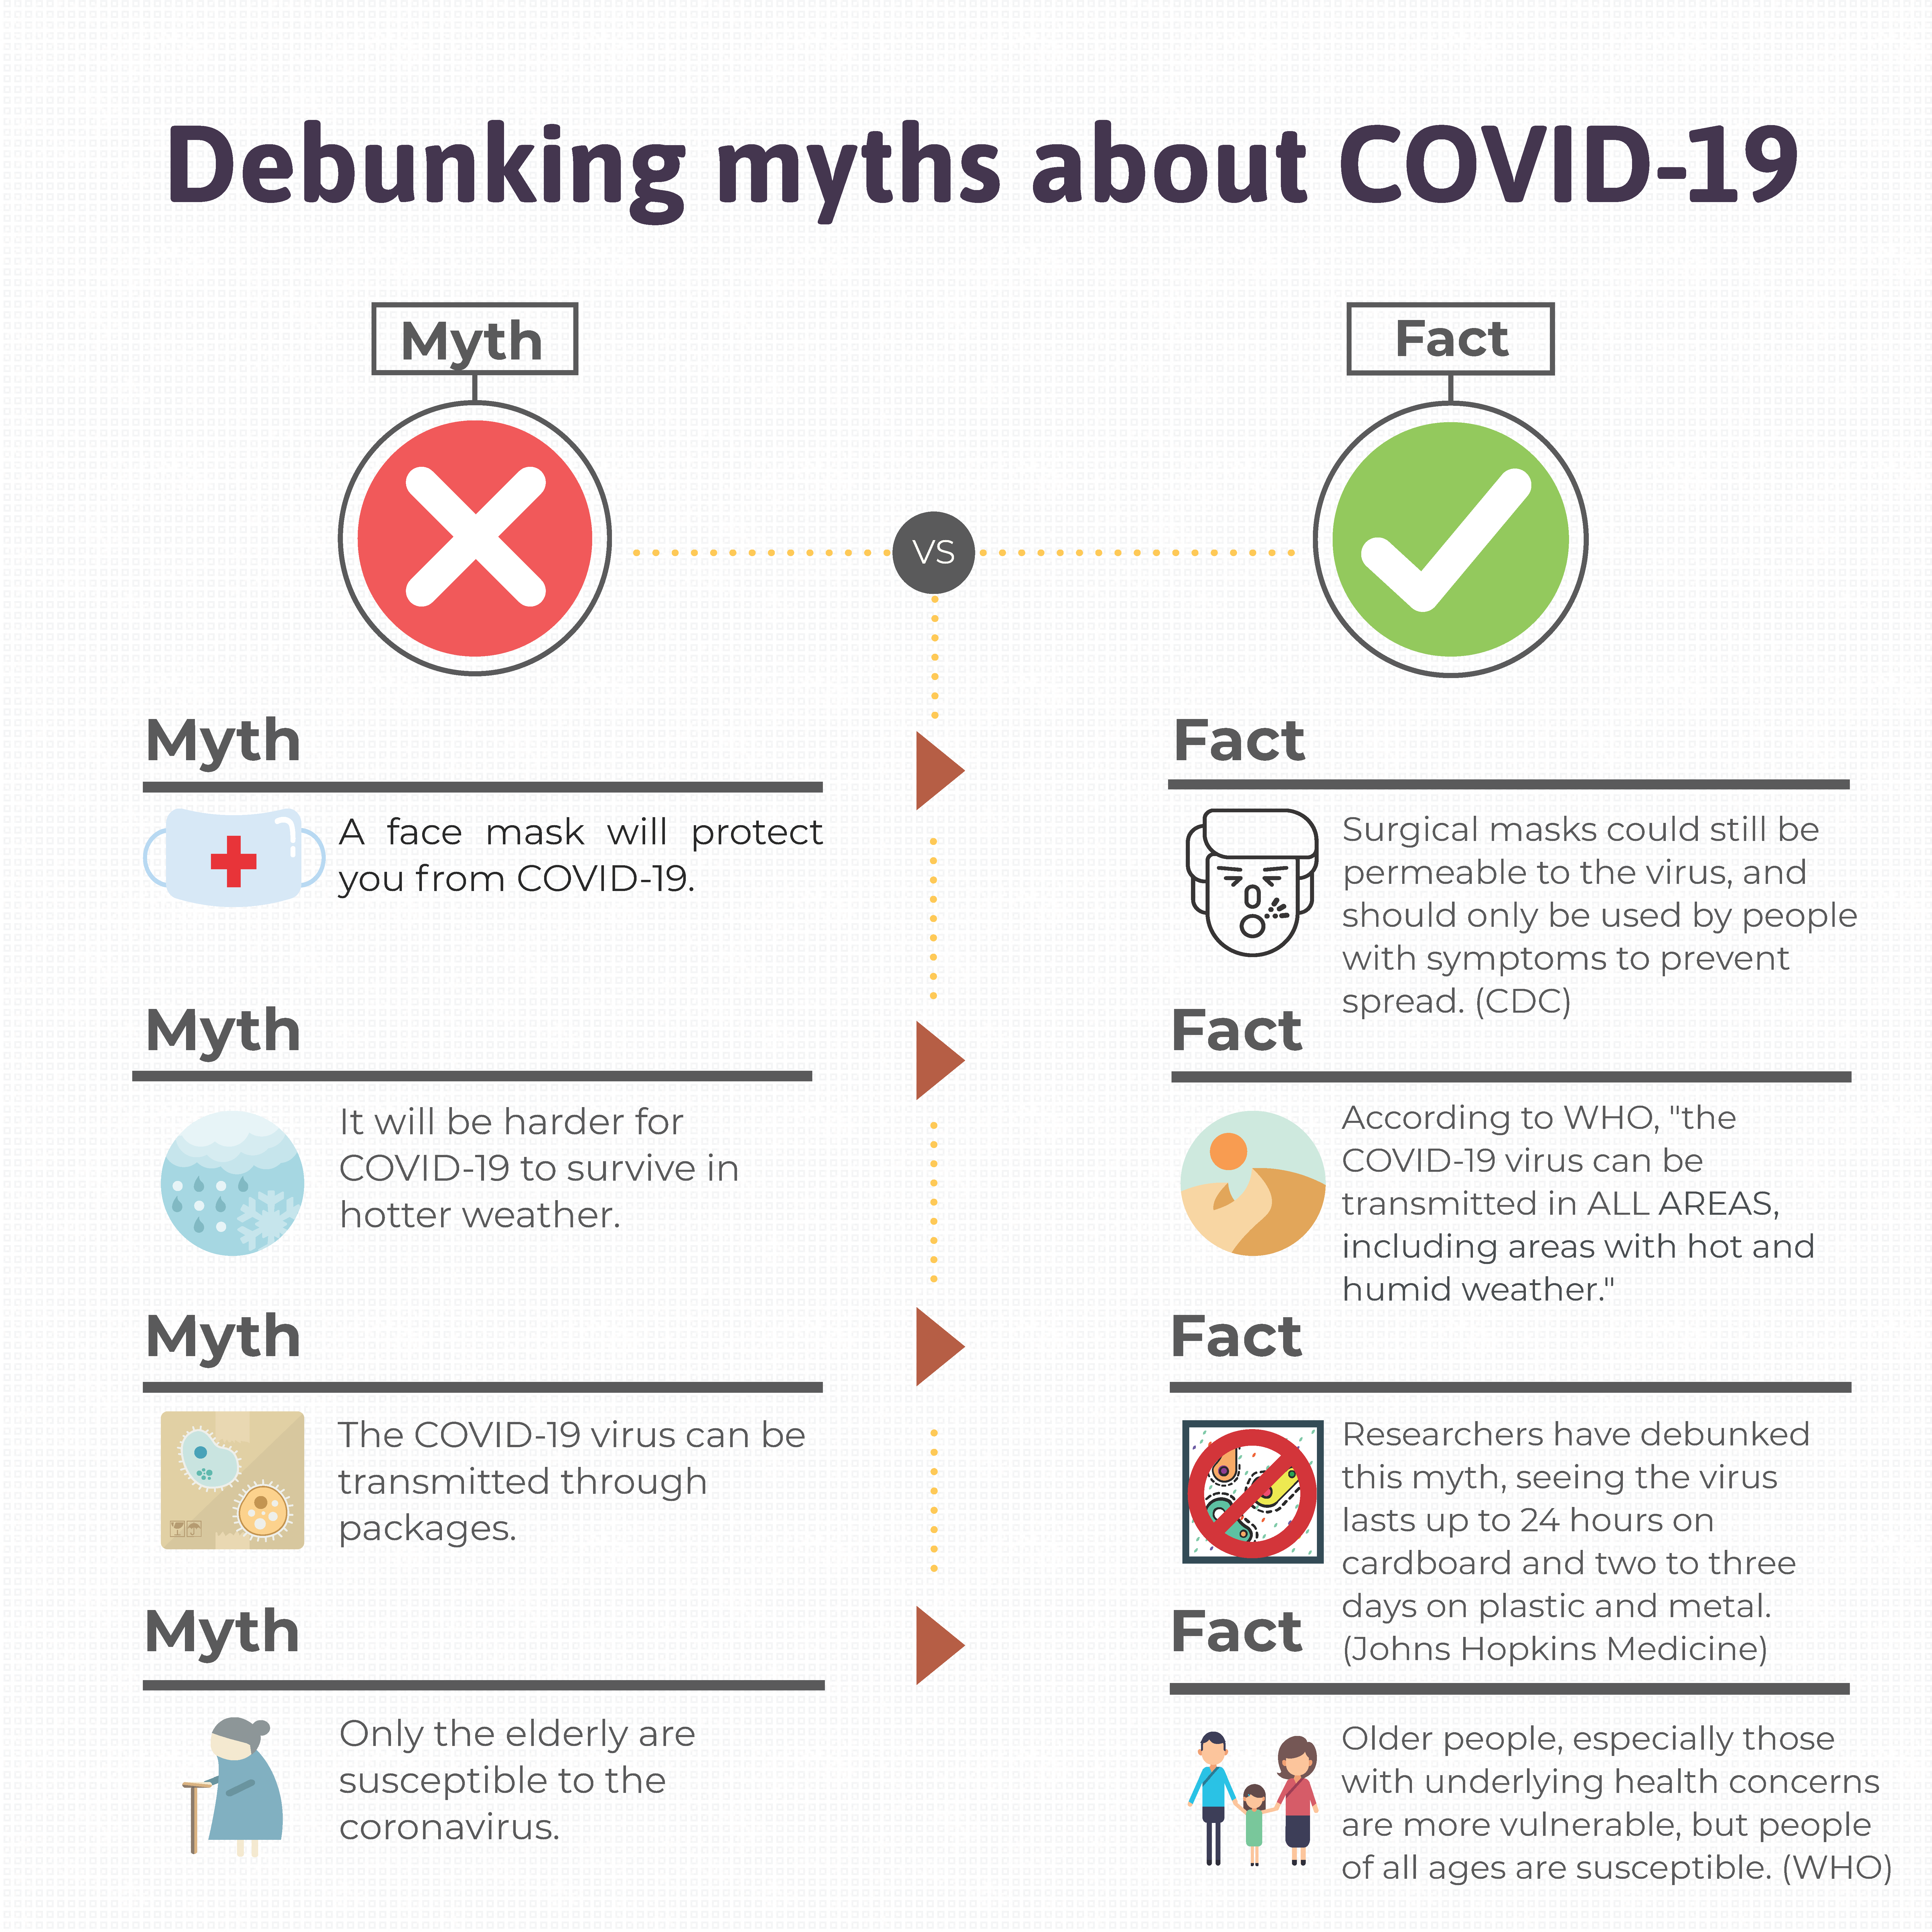 Debunking myths about COVID-19